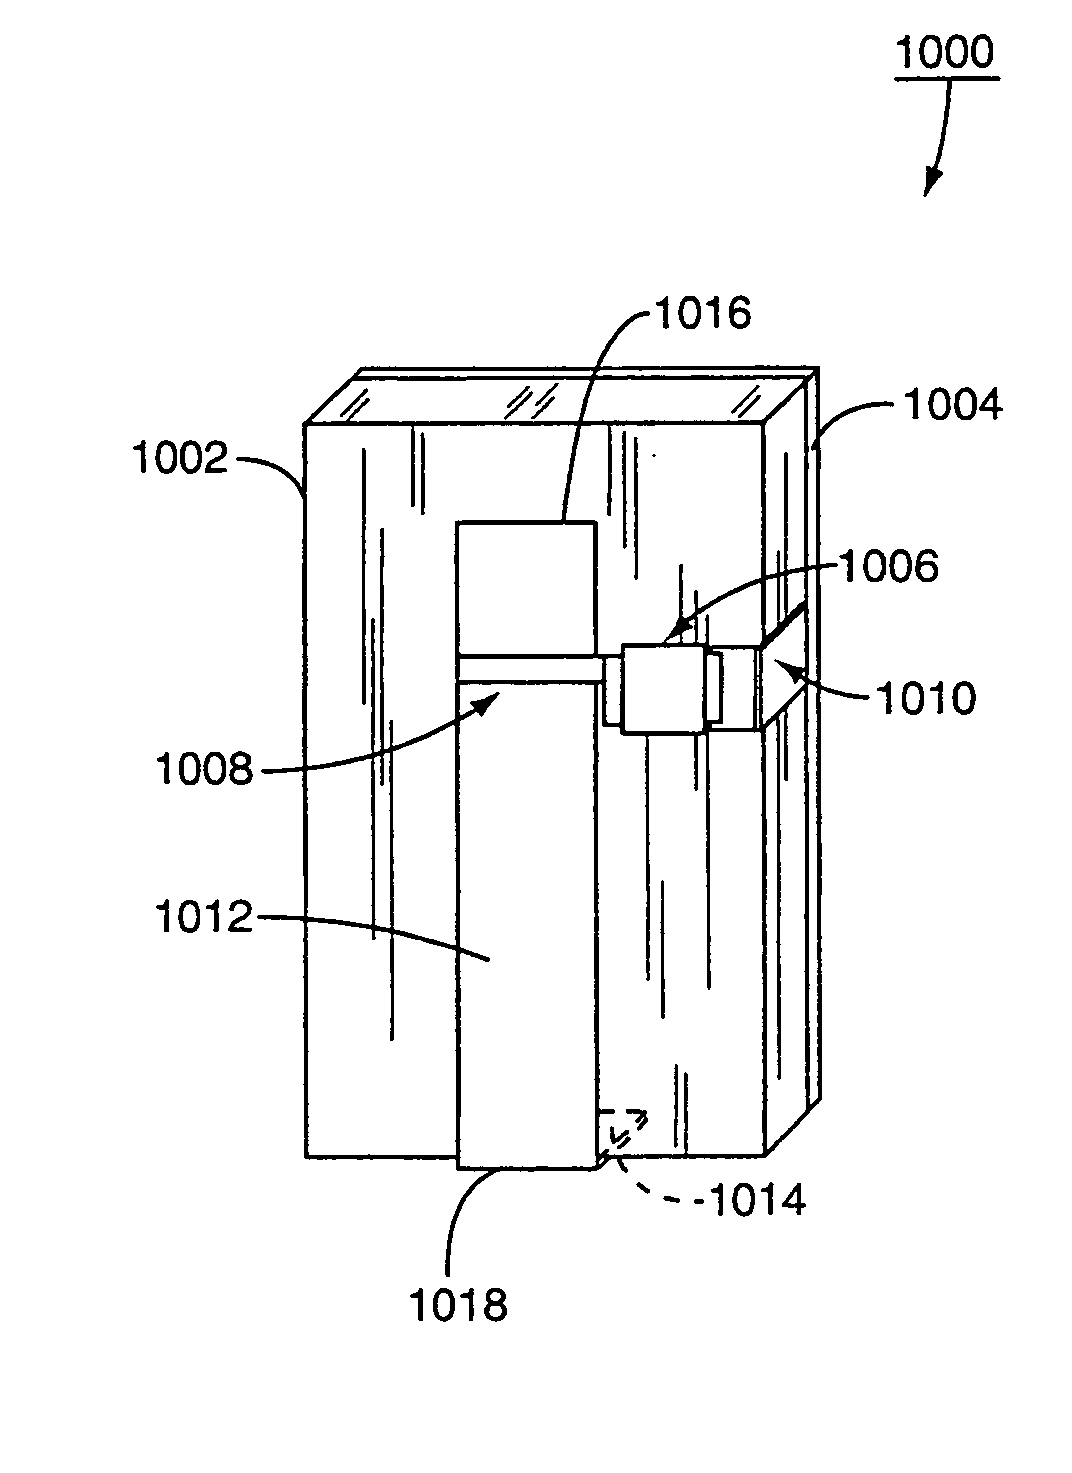 Grounded antenna for a wireless communication device and method